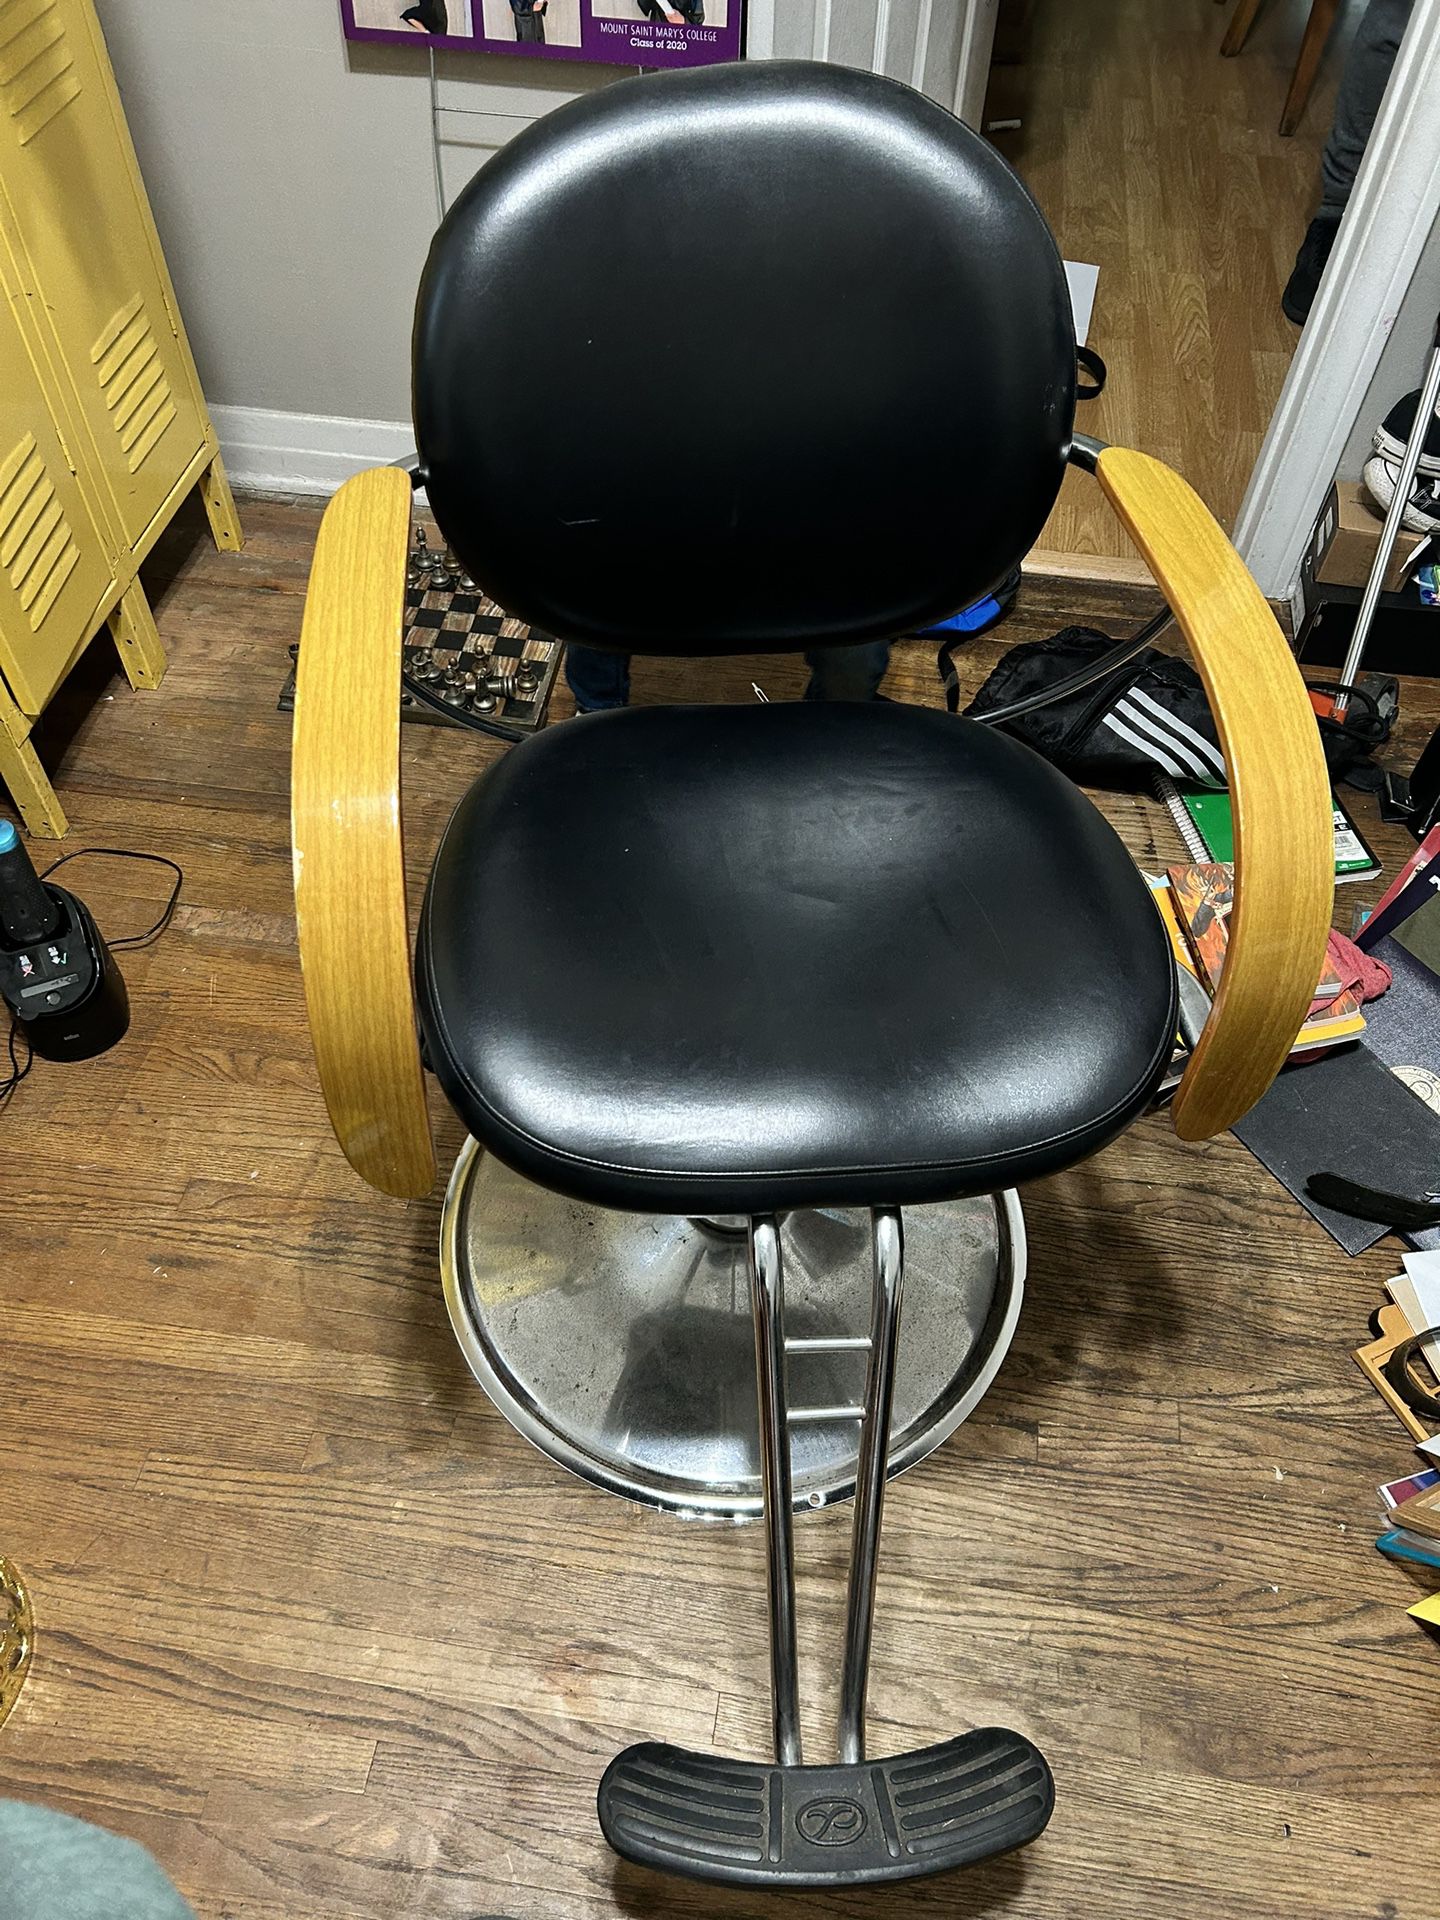 Salon / Barber Chair Very Appealing.